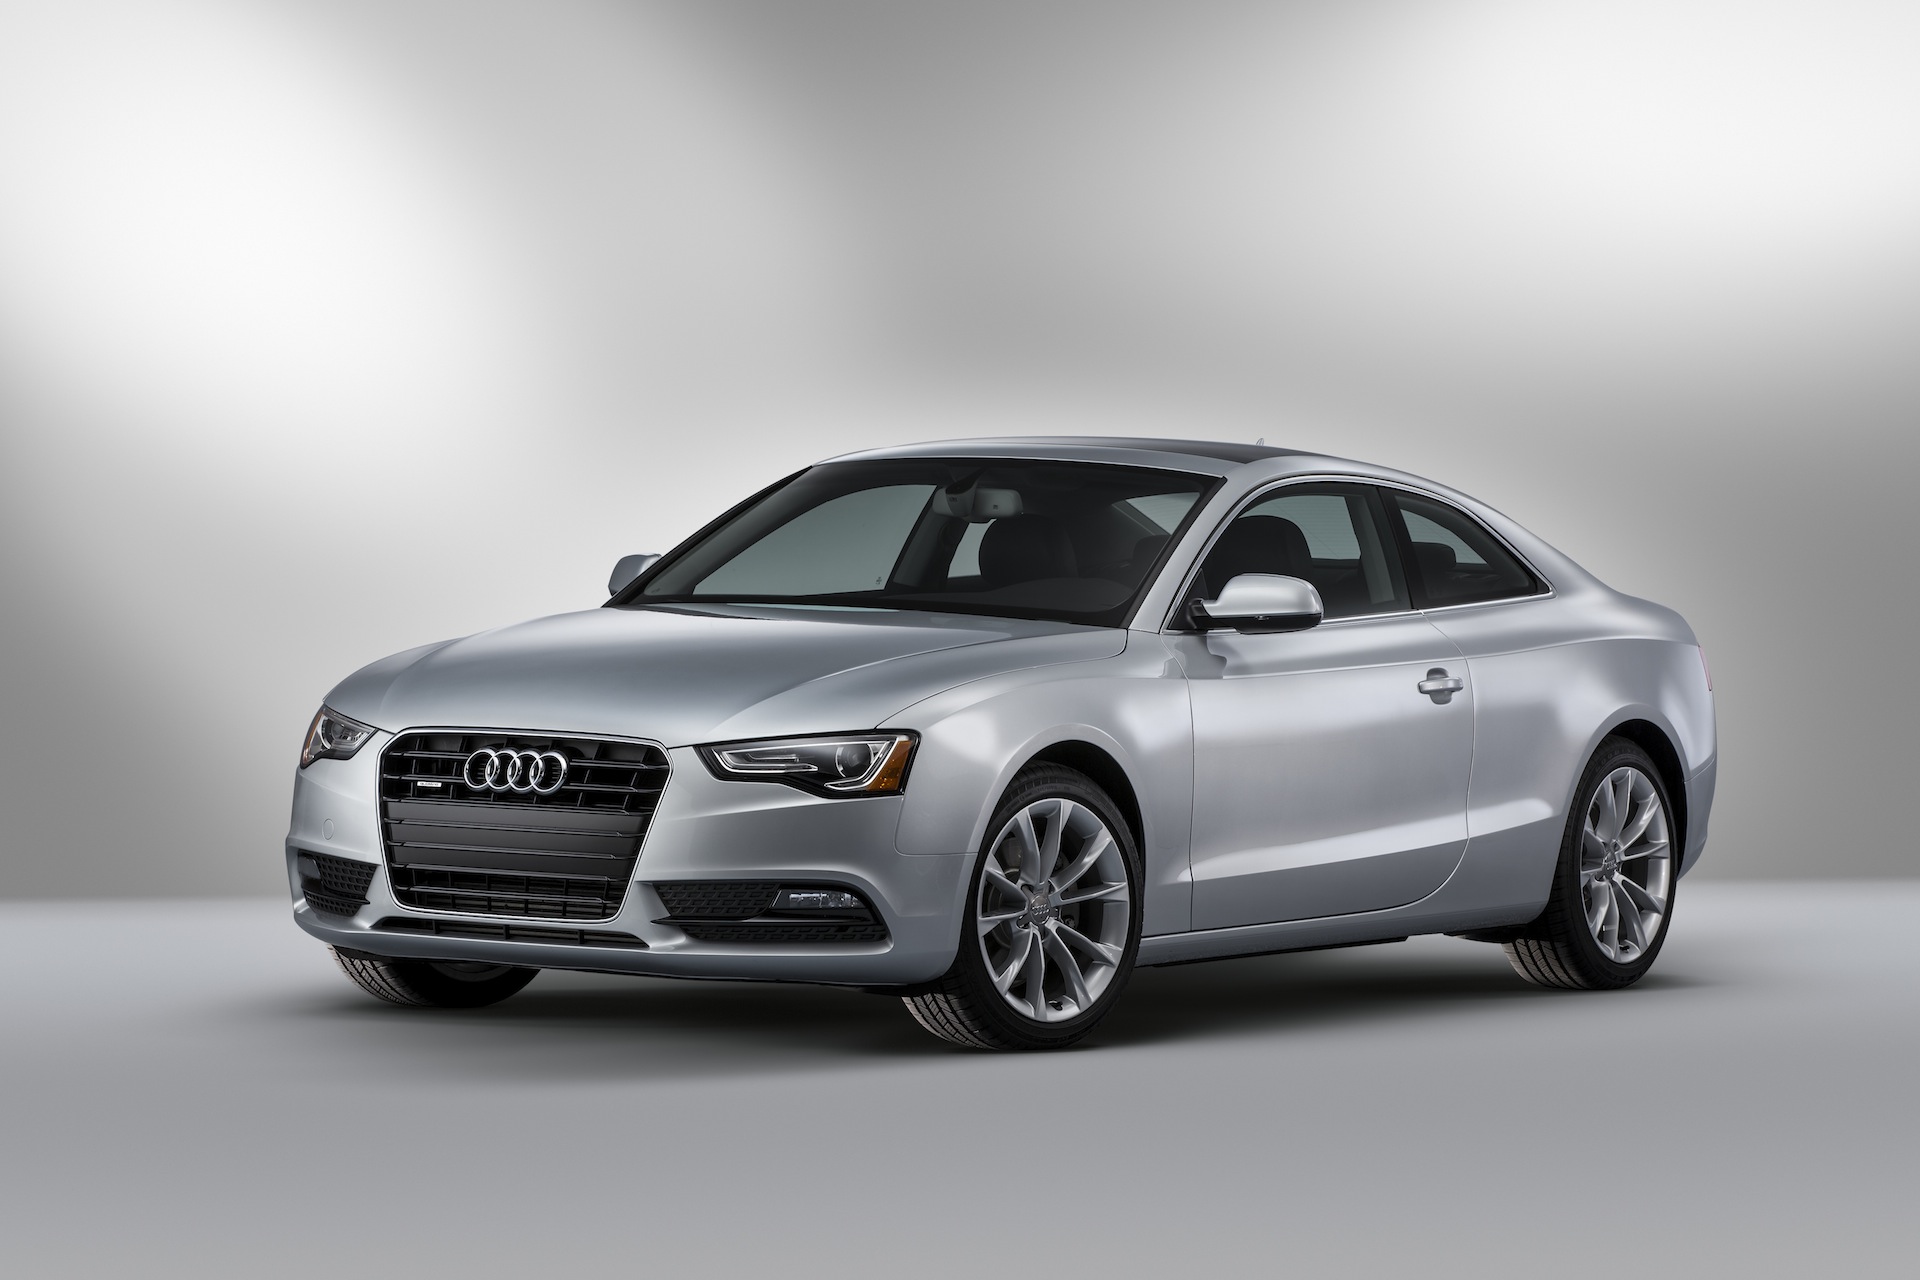 2014 Audi A5 Review, Ratings, Specs, Prices, and Photos - The Car Connection